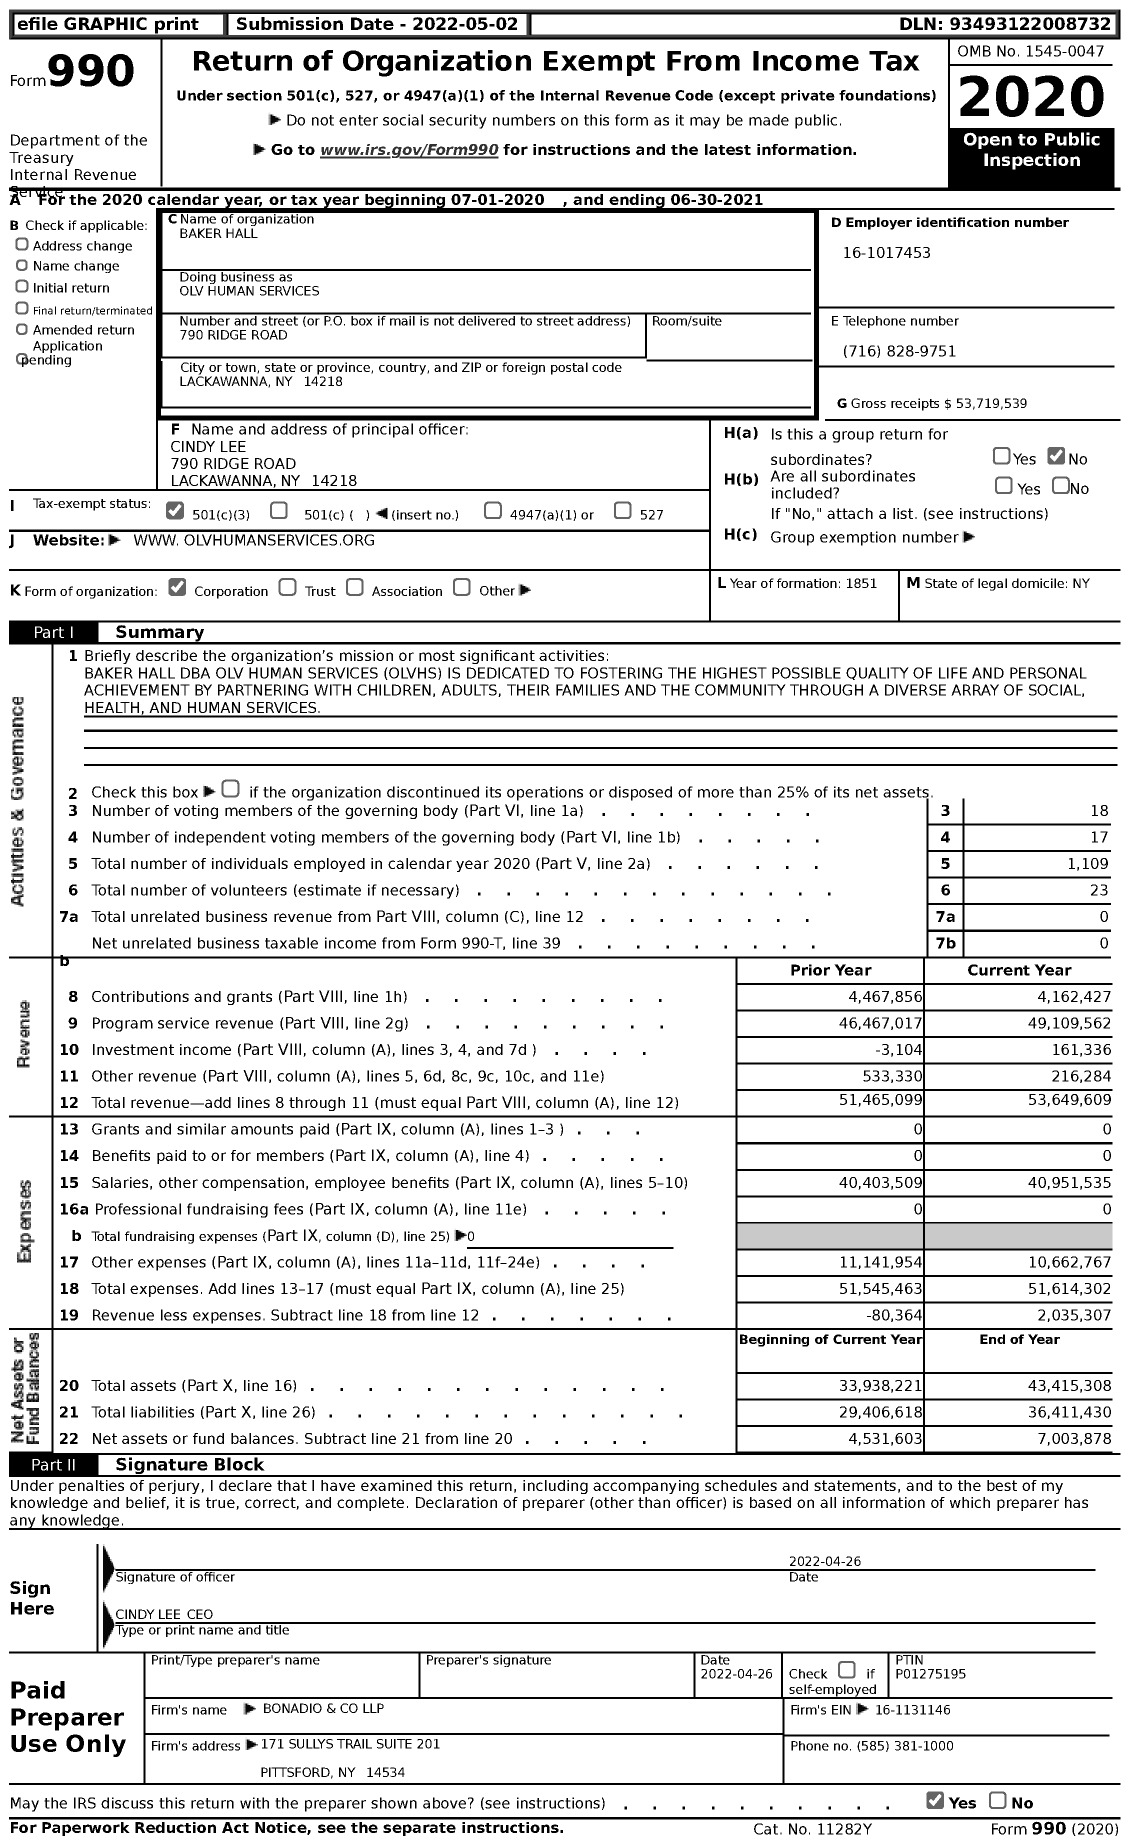 Image of first page of 2020 Form 990 for Olv Human Services (BVS)